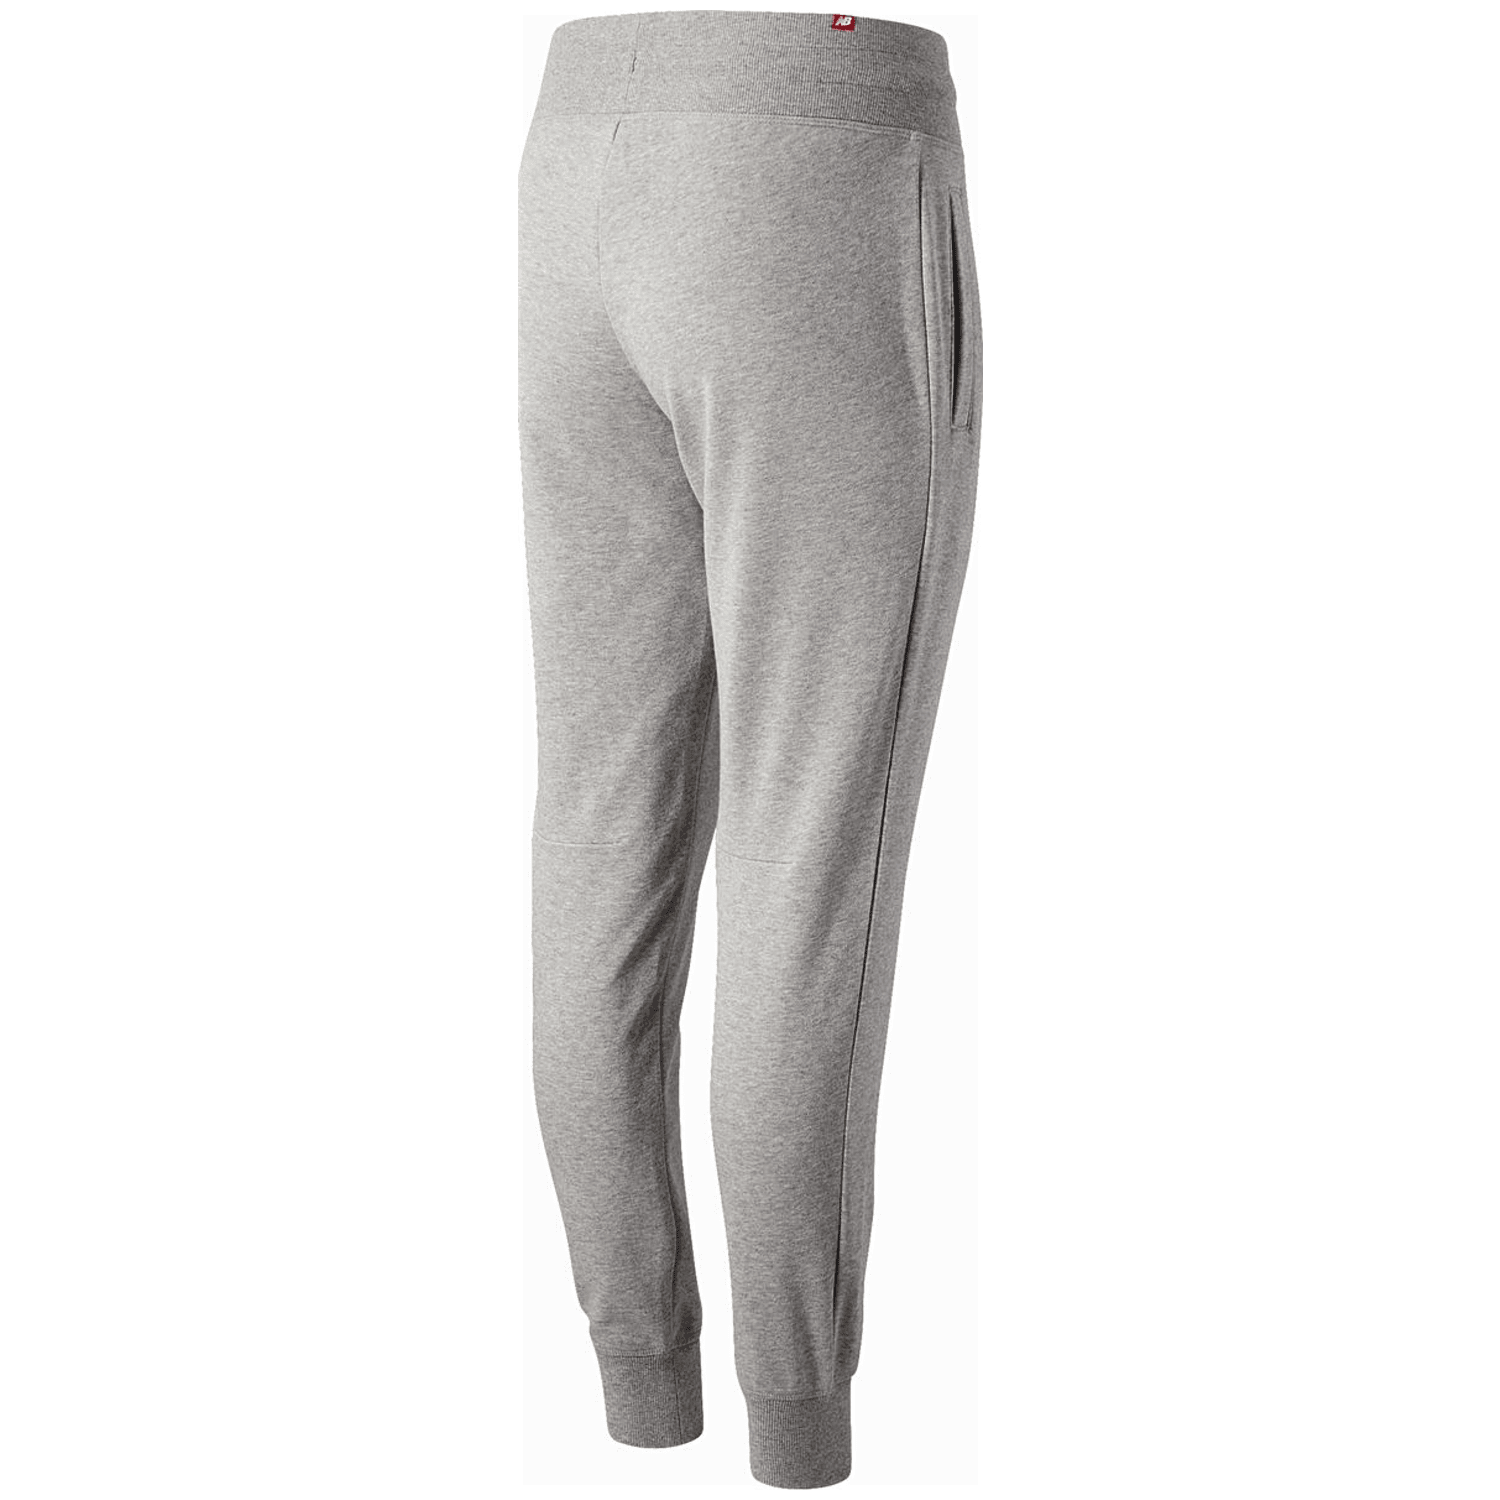 New Balance NB Essentials French Terry Sweatpant Damen Tights